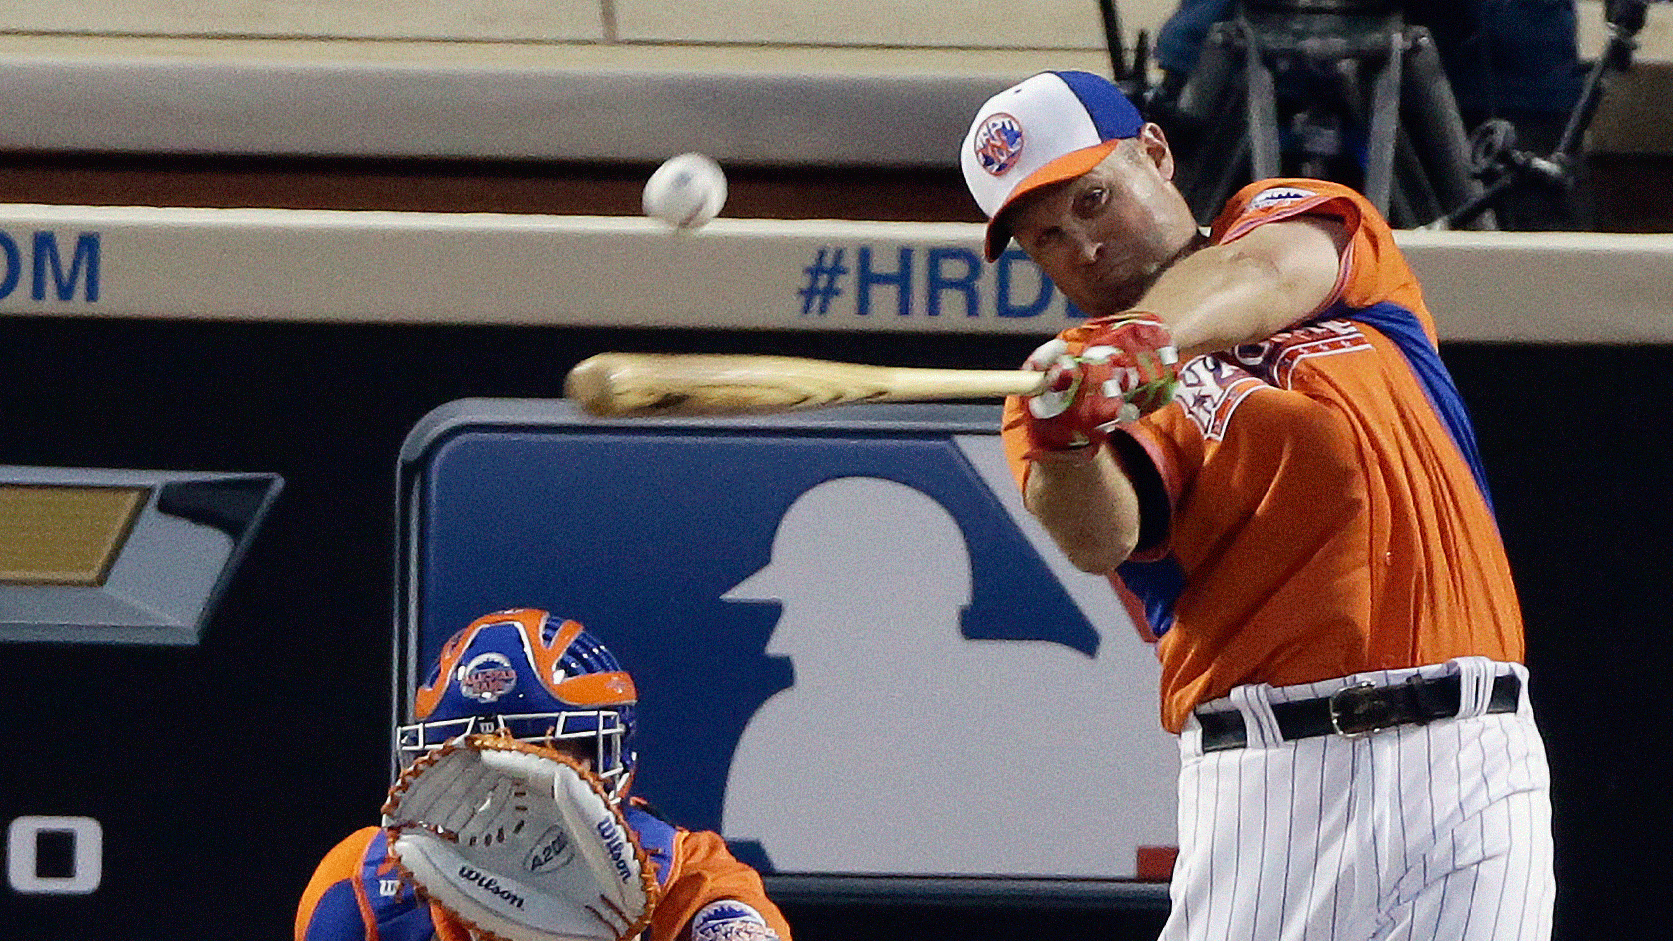 Michael Cuddyer mashes a dinger, he was one of the four finalists. (AP/Matt Slocum)